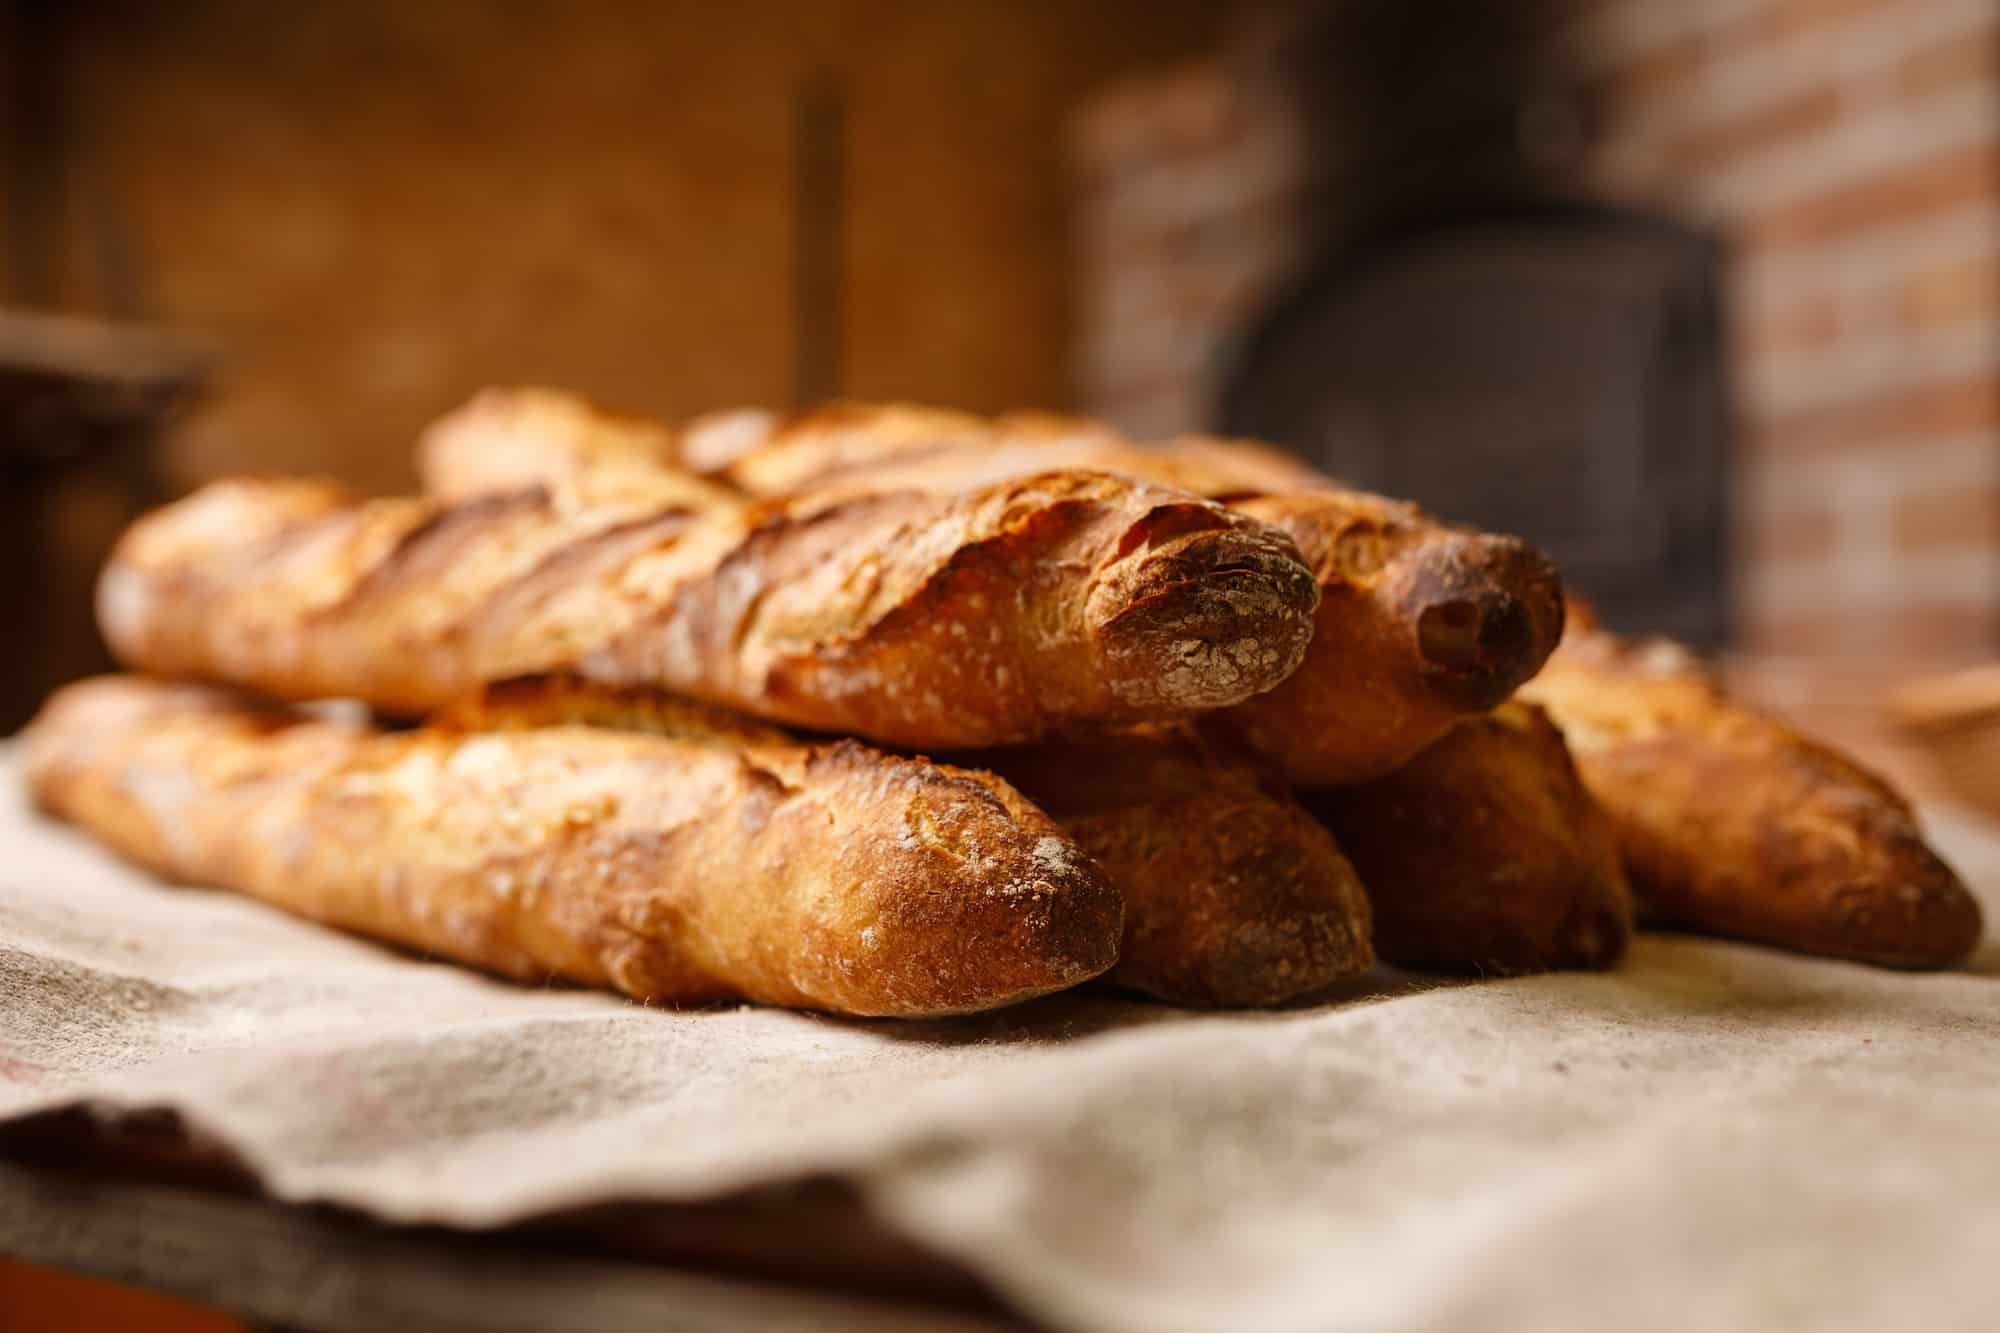 Four of the best bakeries in Paris' Abbesses area, that sell delicious crusty baguettes like these.